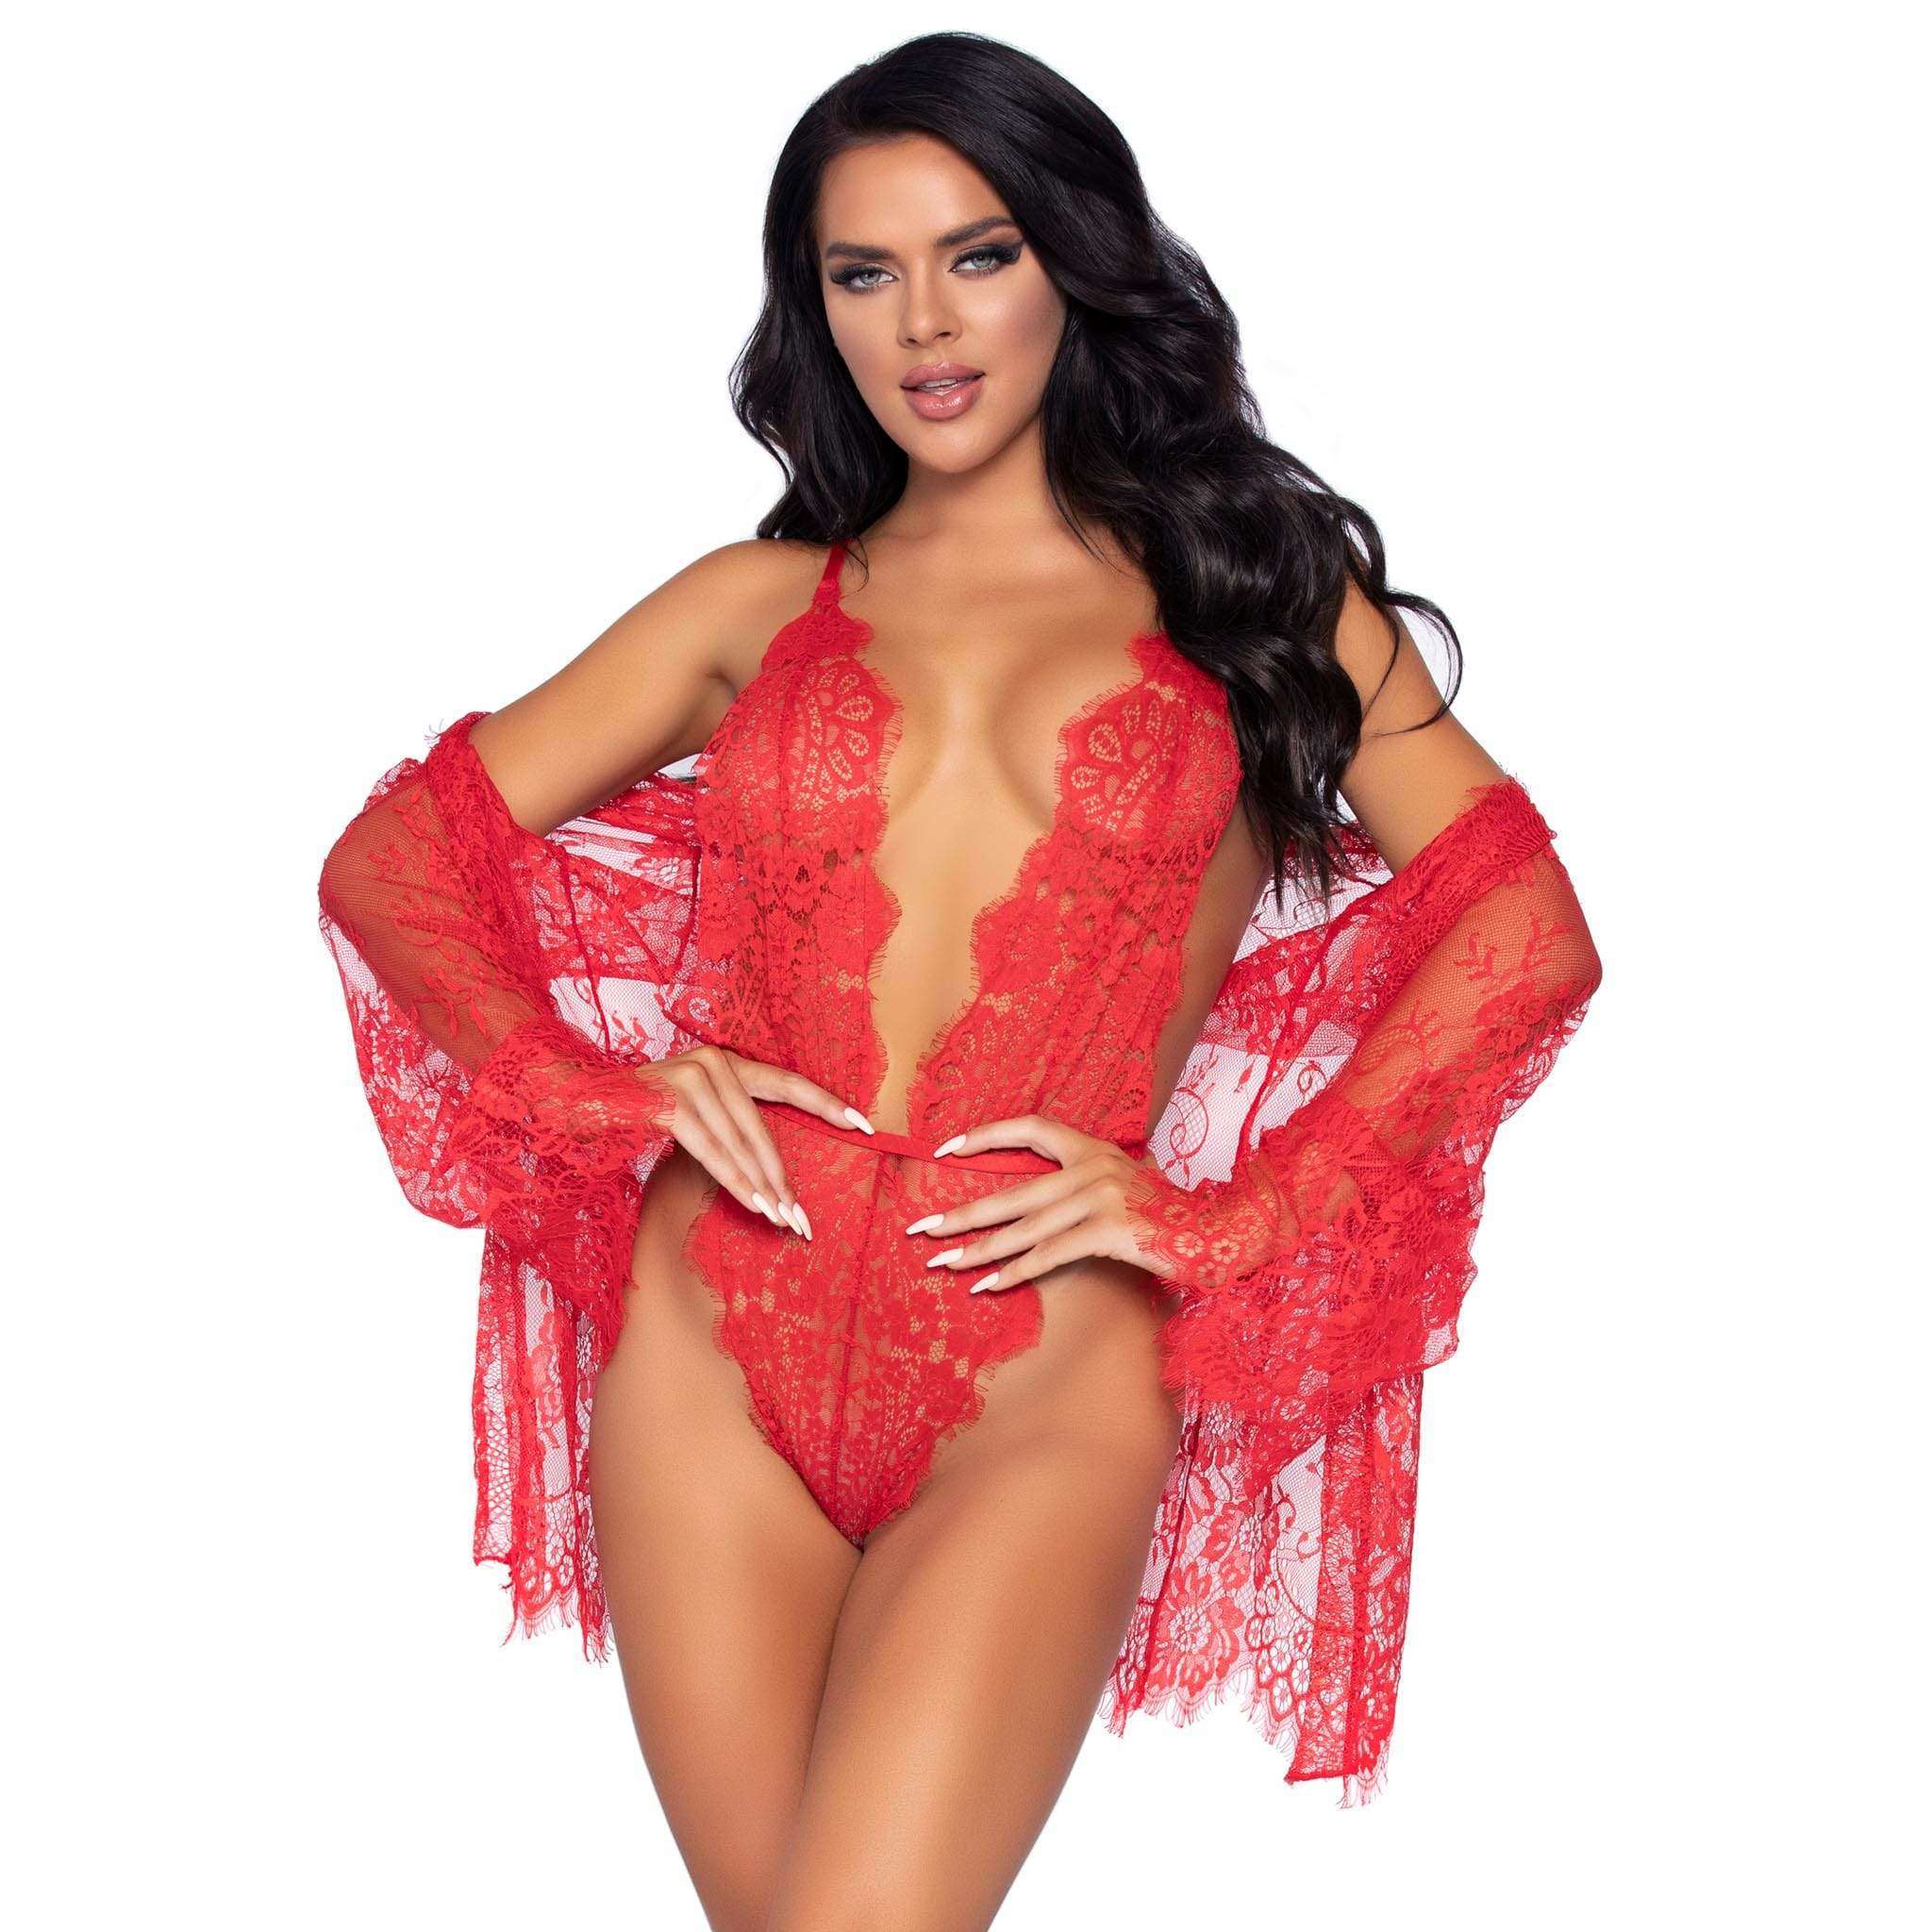 Floral Lace Adjustable Teddy w/ Cheeky Thong & Matching Lace Robe